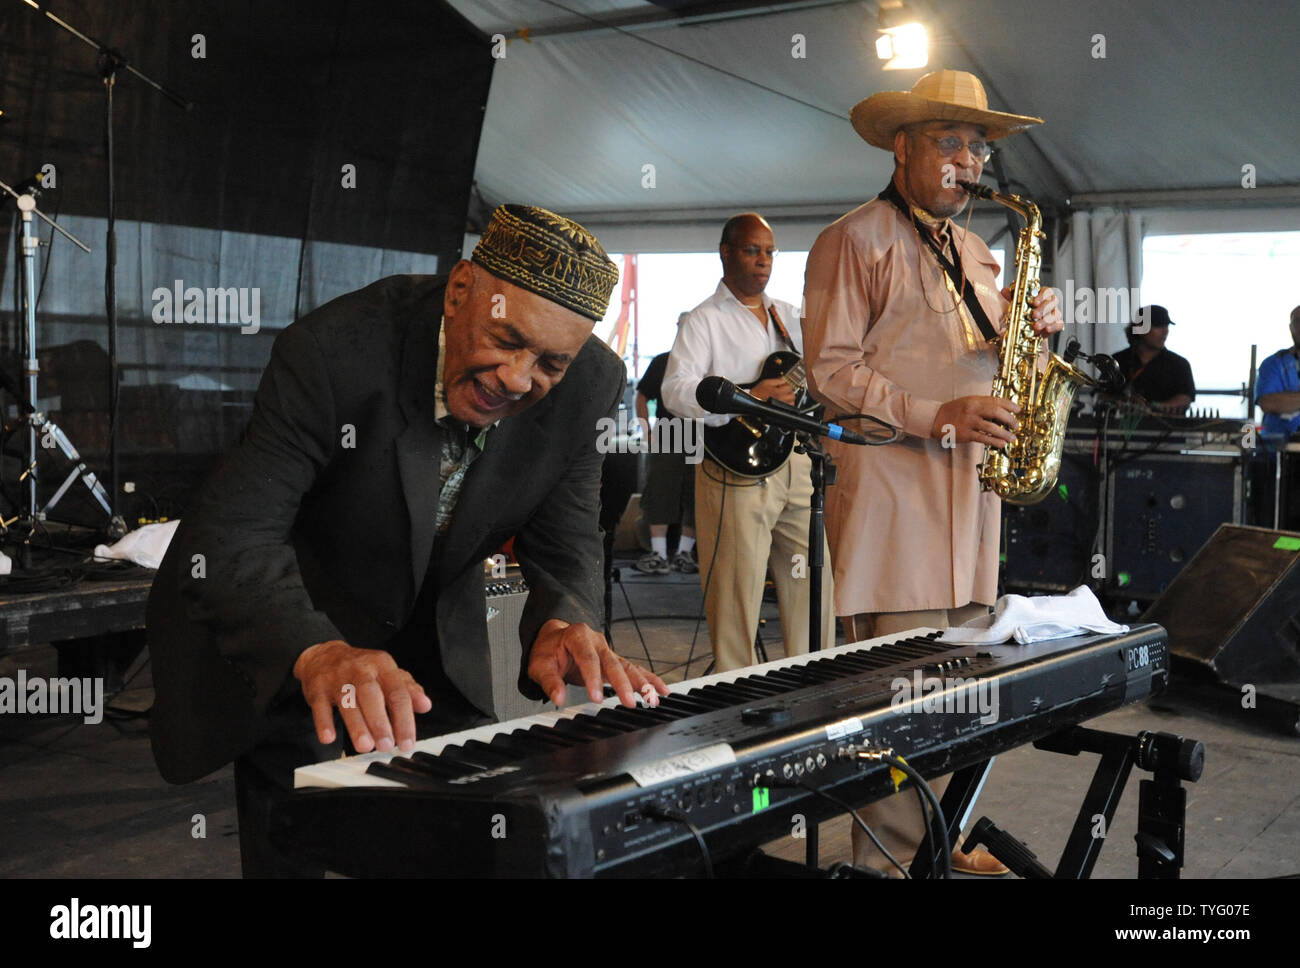 New Orleans legend Eddie Bo plays the keyboard as he entertains the crowd at the Fais Do Do stage of the 2008 New Orleans Jazz and Heritage Festival in New Orleans on April 26, 2008. The Jazz Fest is a 10-day cultural feast in which thousands of musicians, cooks and craftspeople welcome 400,000 visitors each year.  (UPI Photo/Pat Benic) Stock Photo